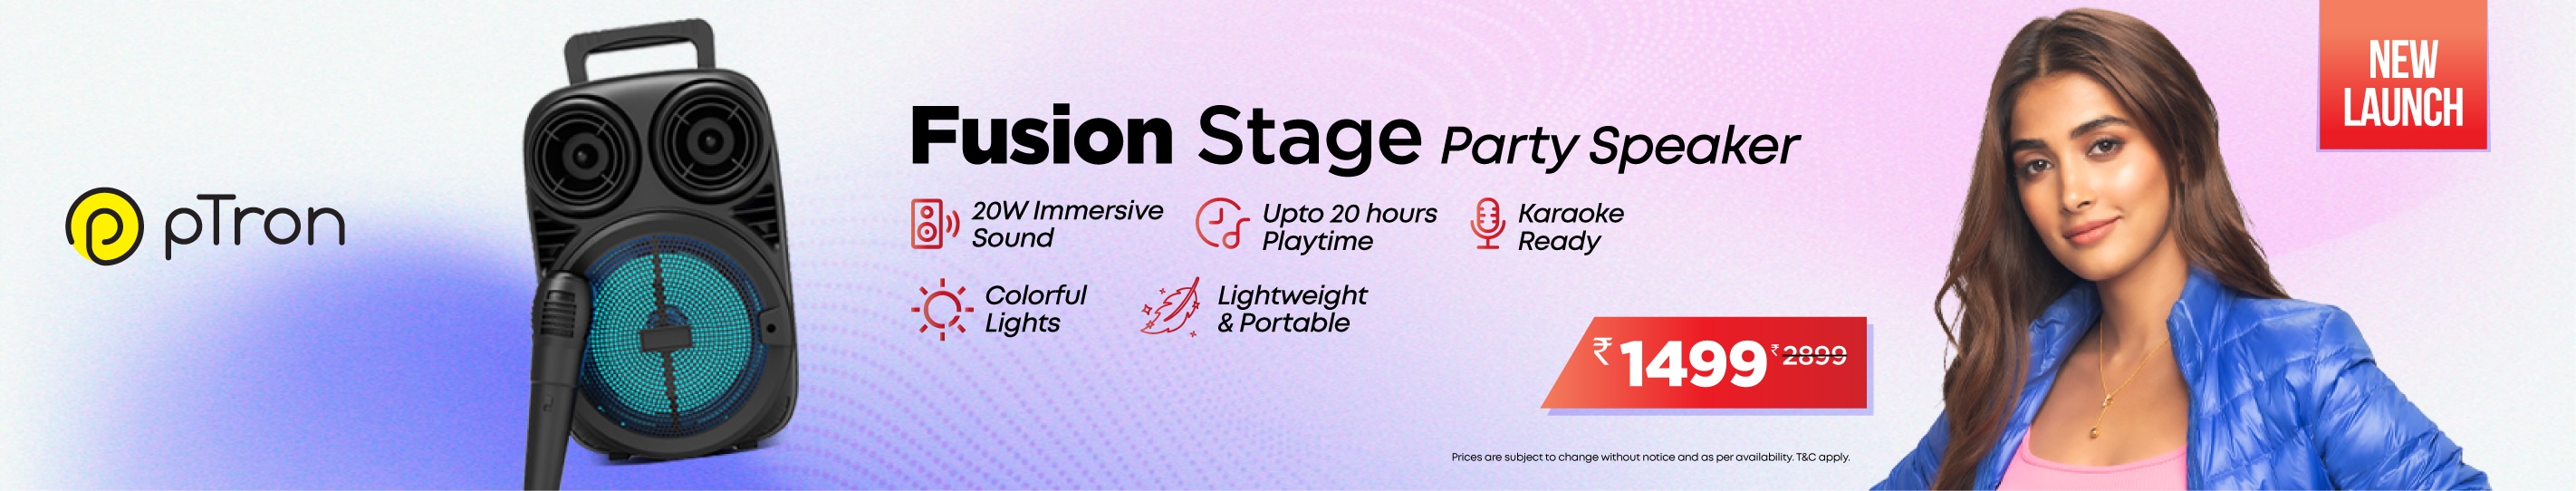 Fusion Stage_Banners_1365 x 260px-01.jpg